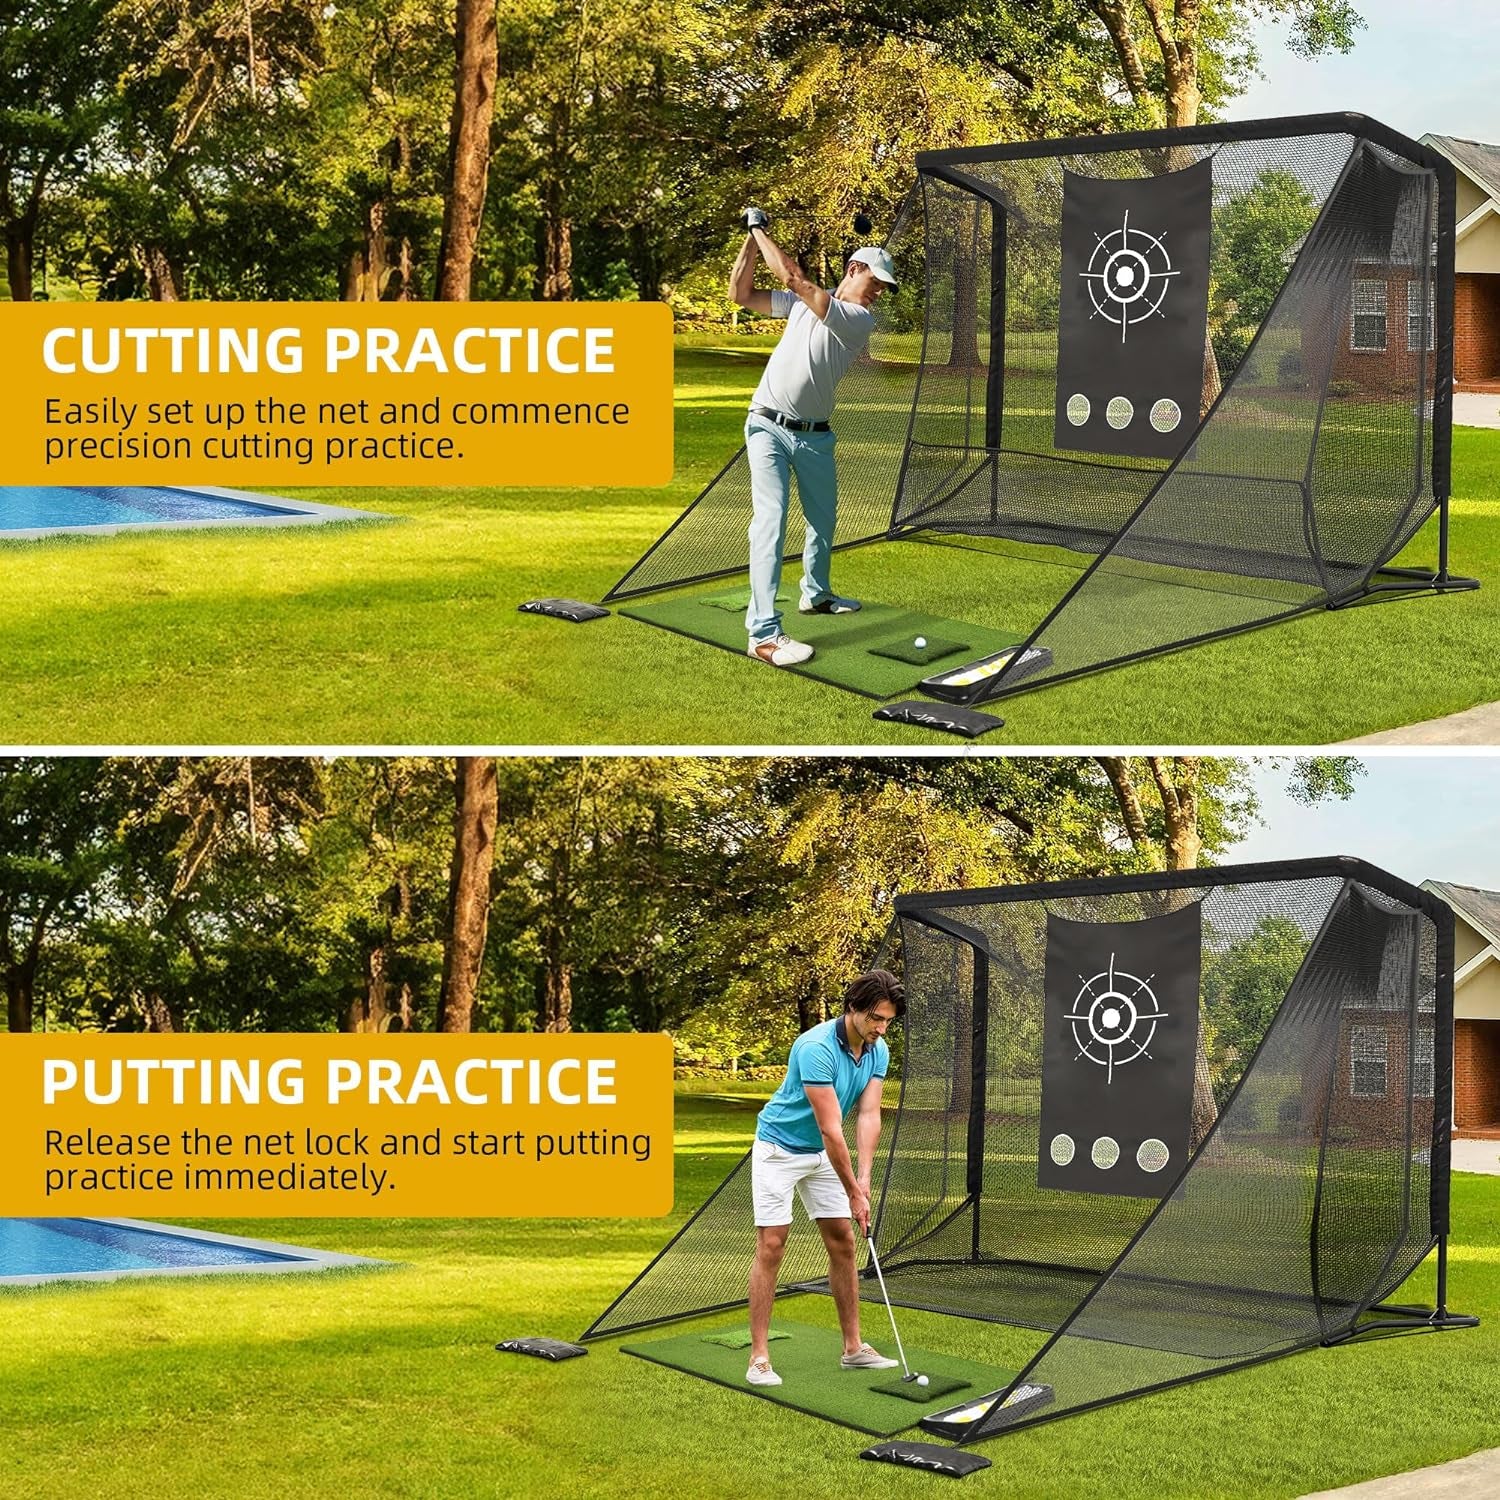 10Ft / 7Ft Golf Hitting Net with Steel Frame, Golf Driving Net Selection, Golf Practice Net for Personal Driving Range Use Training in Backyard, Indoors and Outdoor